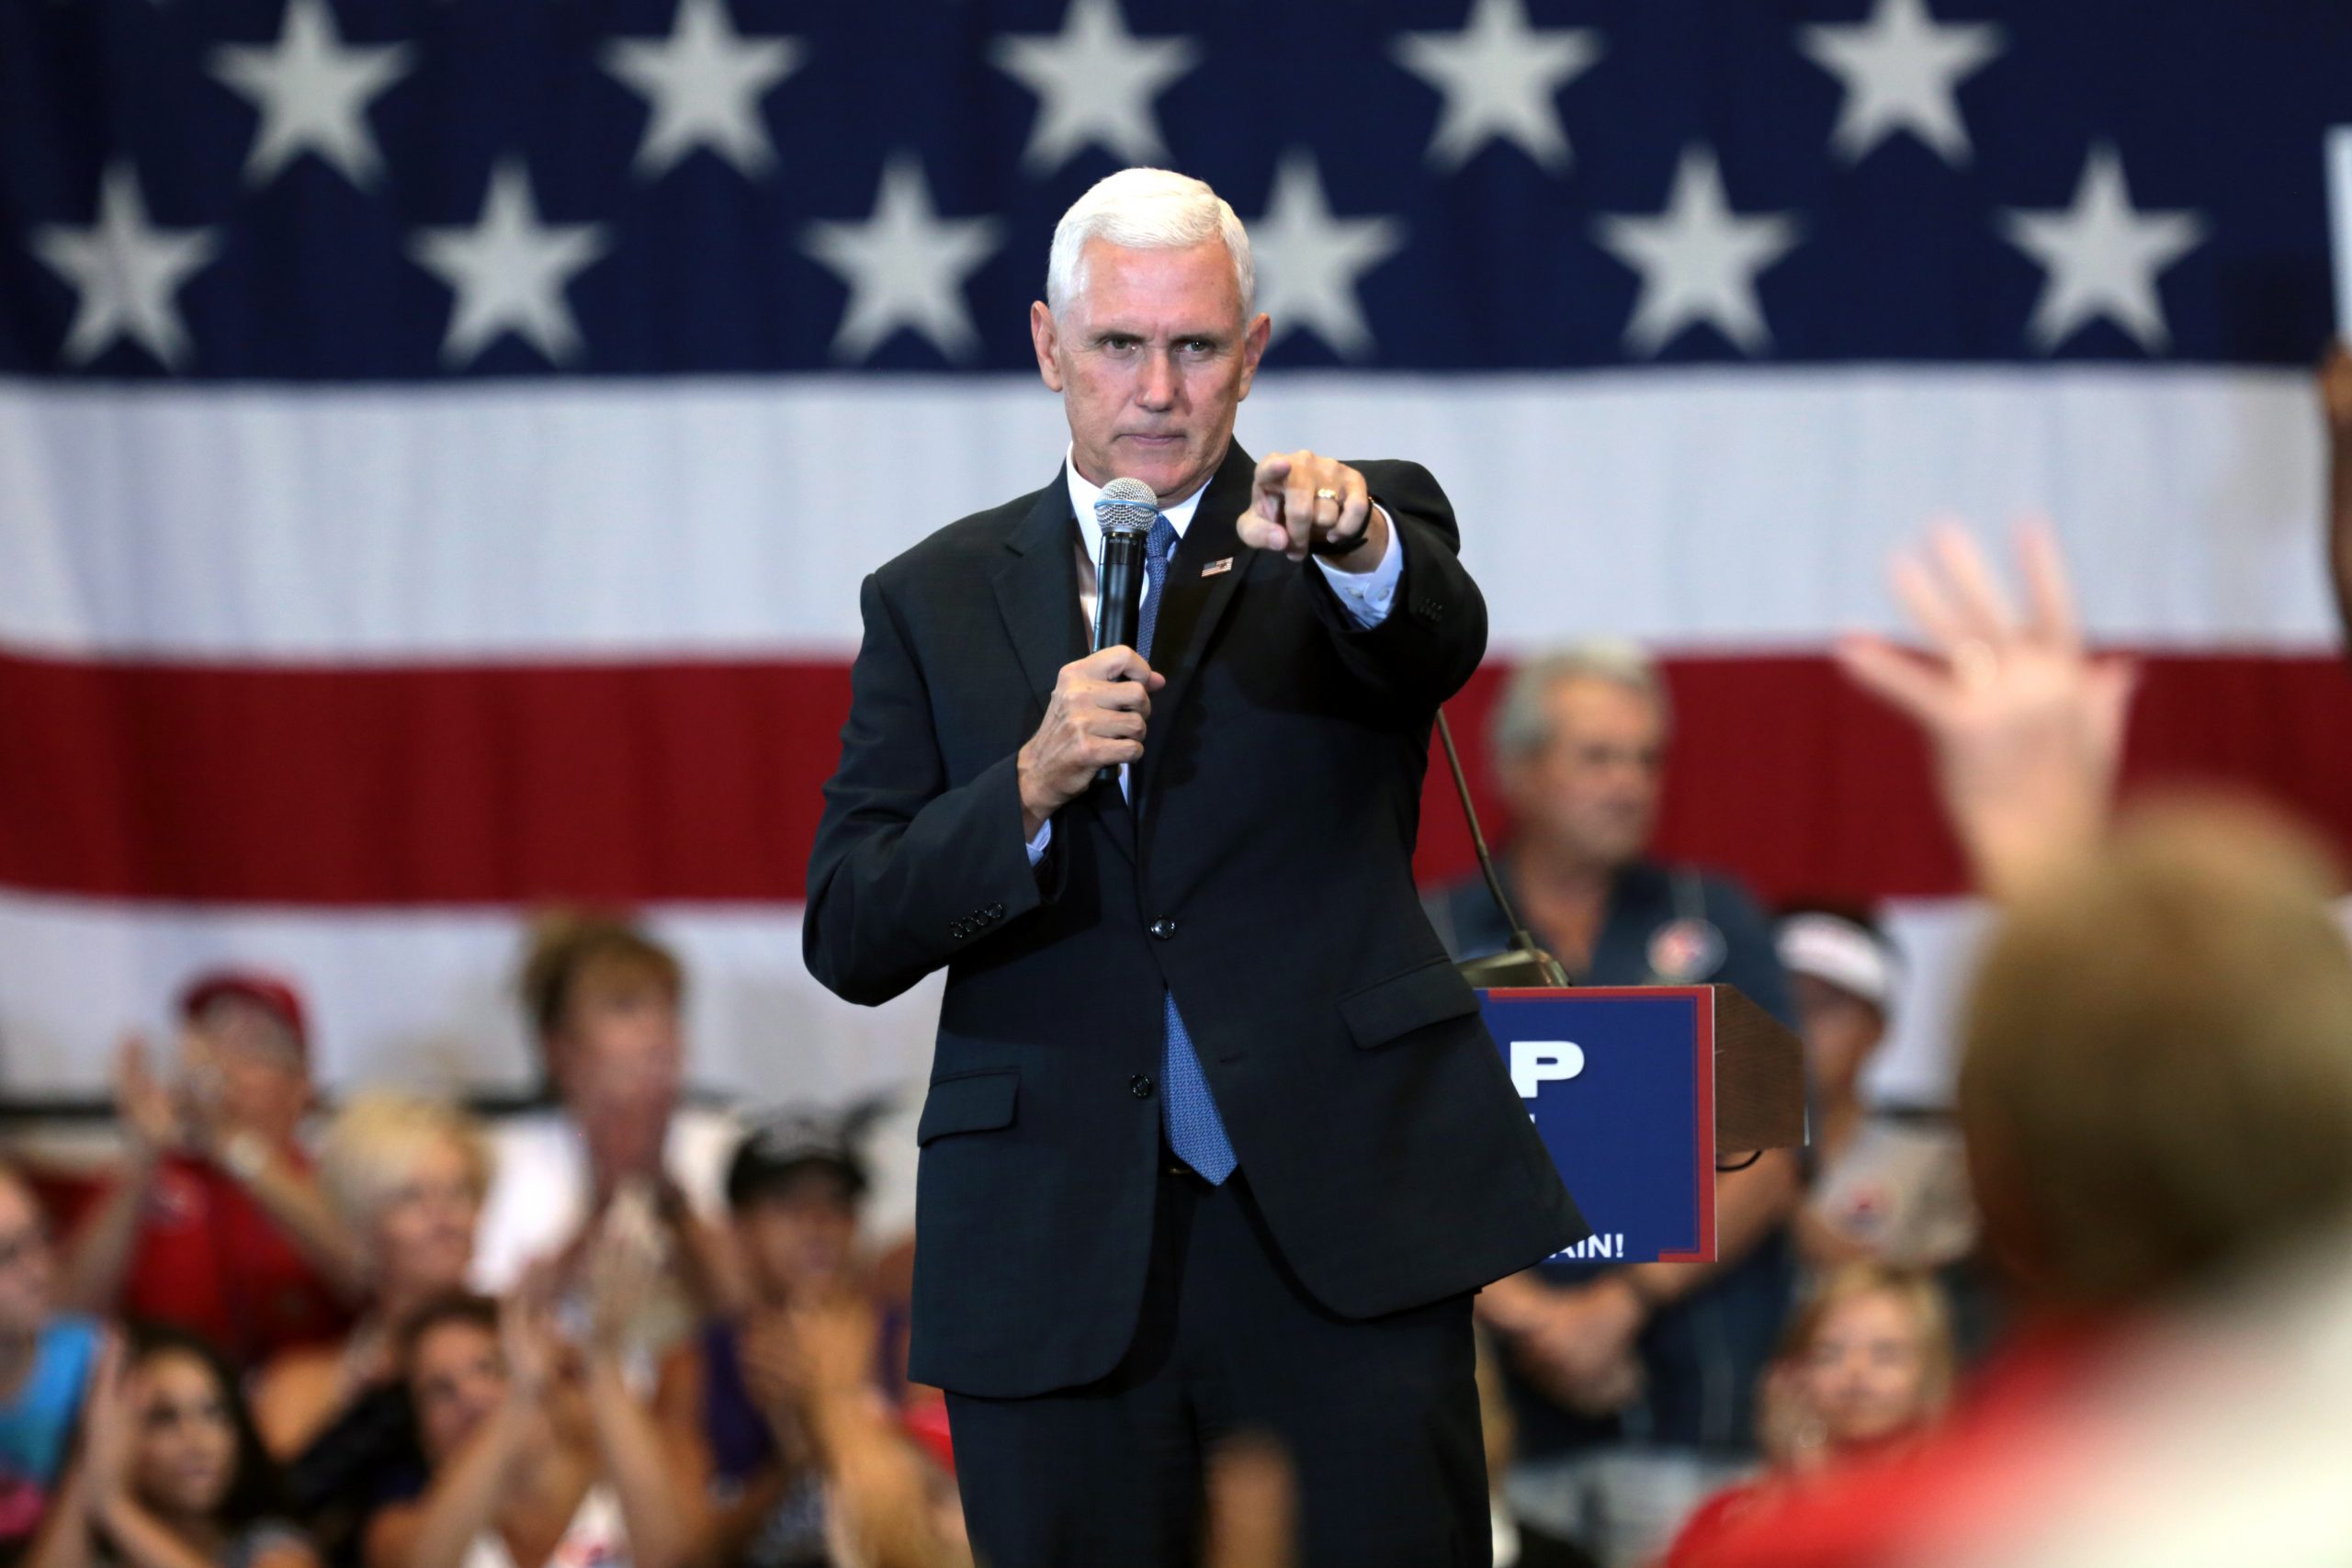 Pence On VP Debate: "I Can’t Wait"